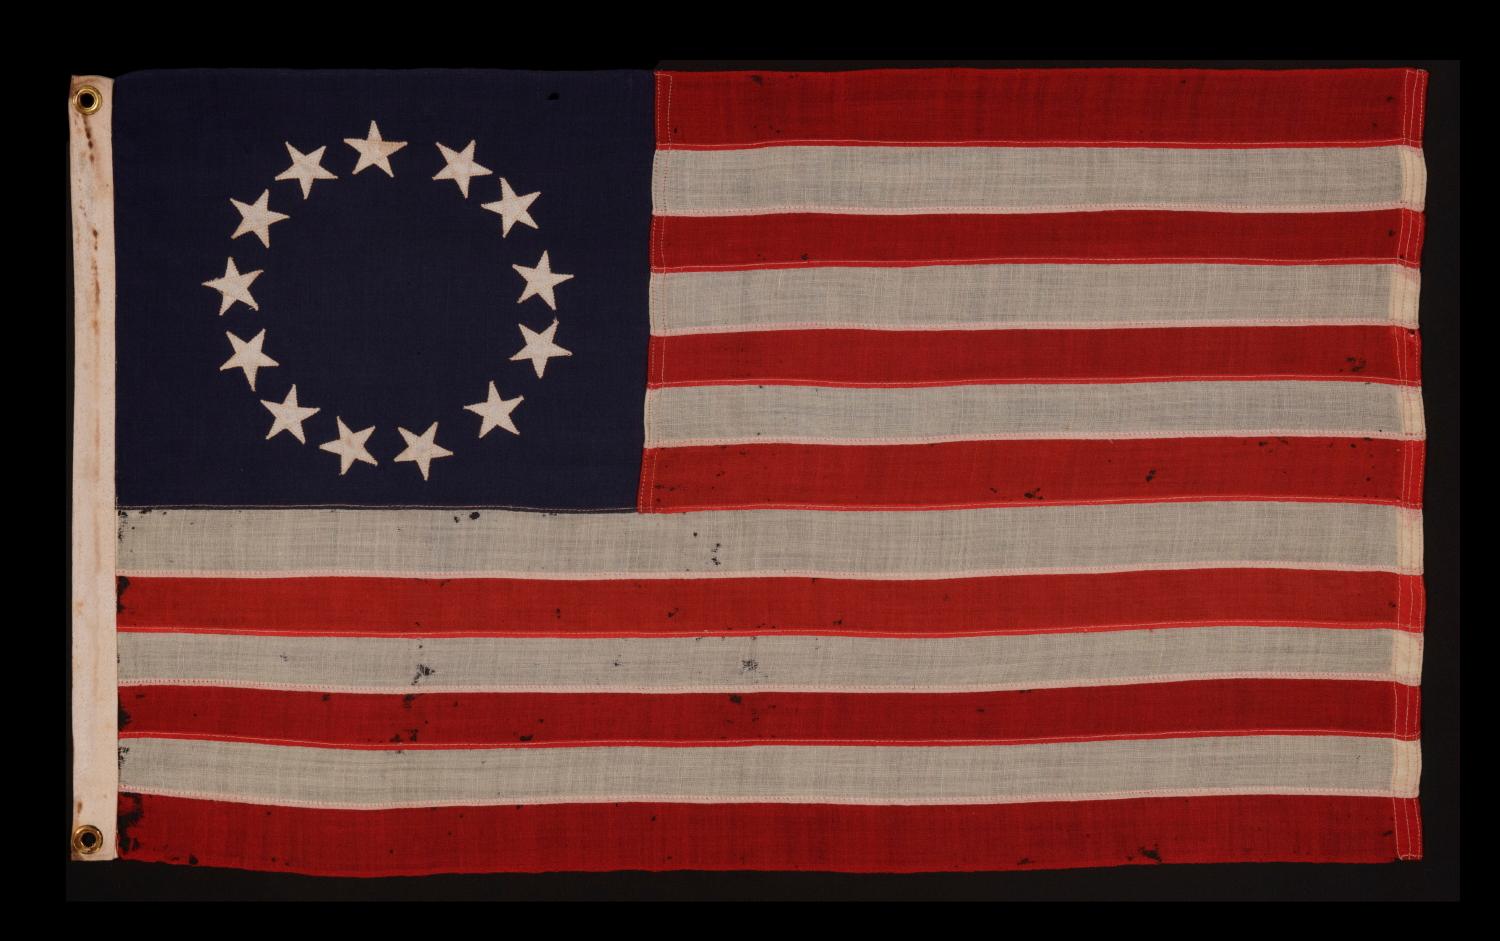 13 STARS IN THE BETSY ROSS PATTERN ON A SMALL-SCALE ANTIQUE AMERICAN FLAG OF THE 1895-1920’s ERA 

13 star flag of the type made from roughly the last decade of the 19th century through the first quarter of the 20th. The stars are arranged in the